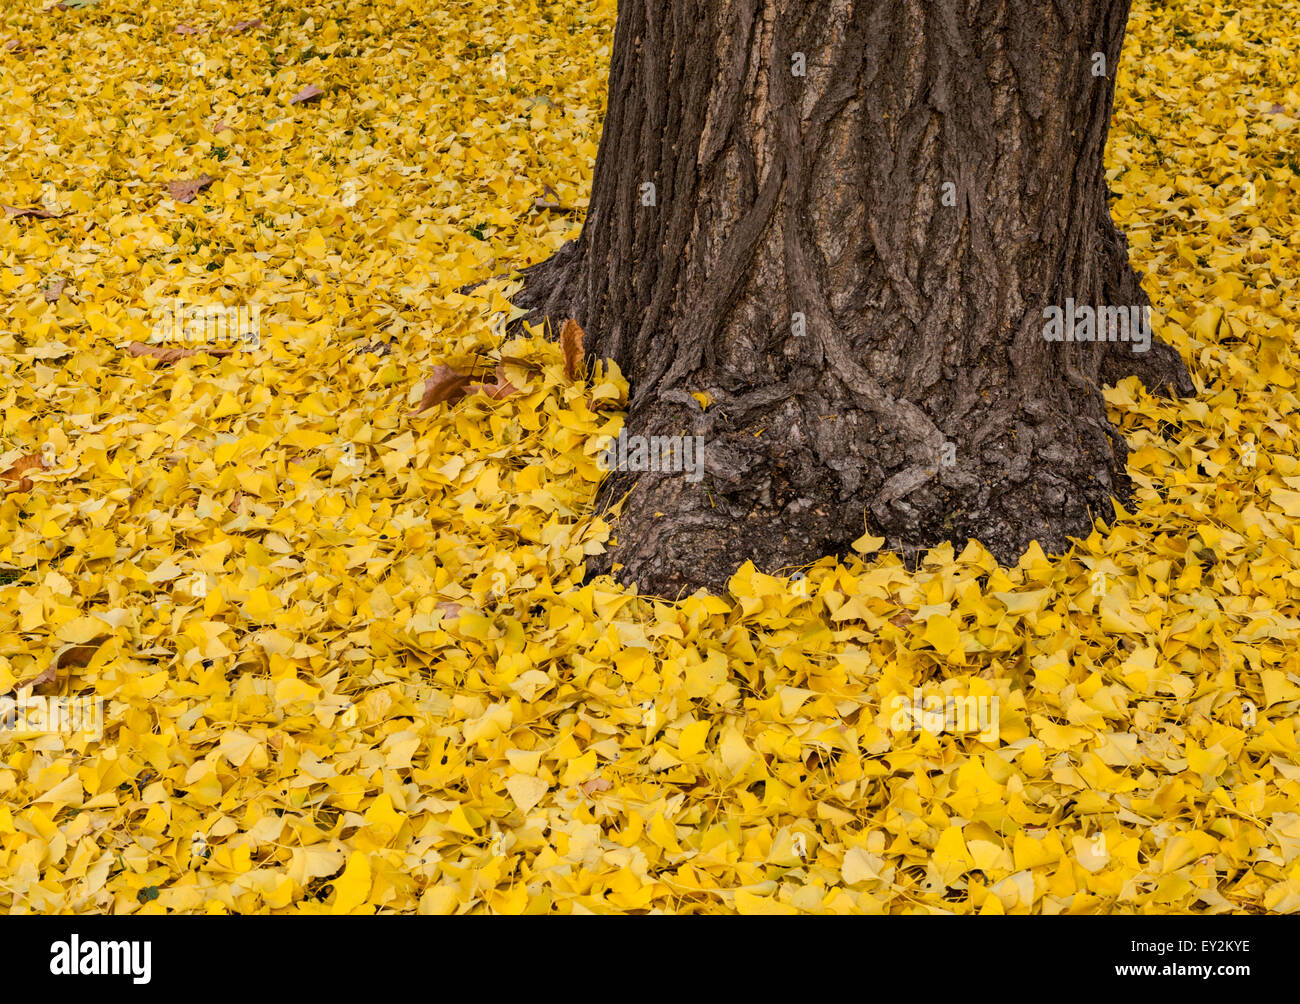 Trunk of tree sits on carpet of yellow leaves near Plaza Lealtad in Madrid Stock Photo